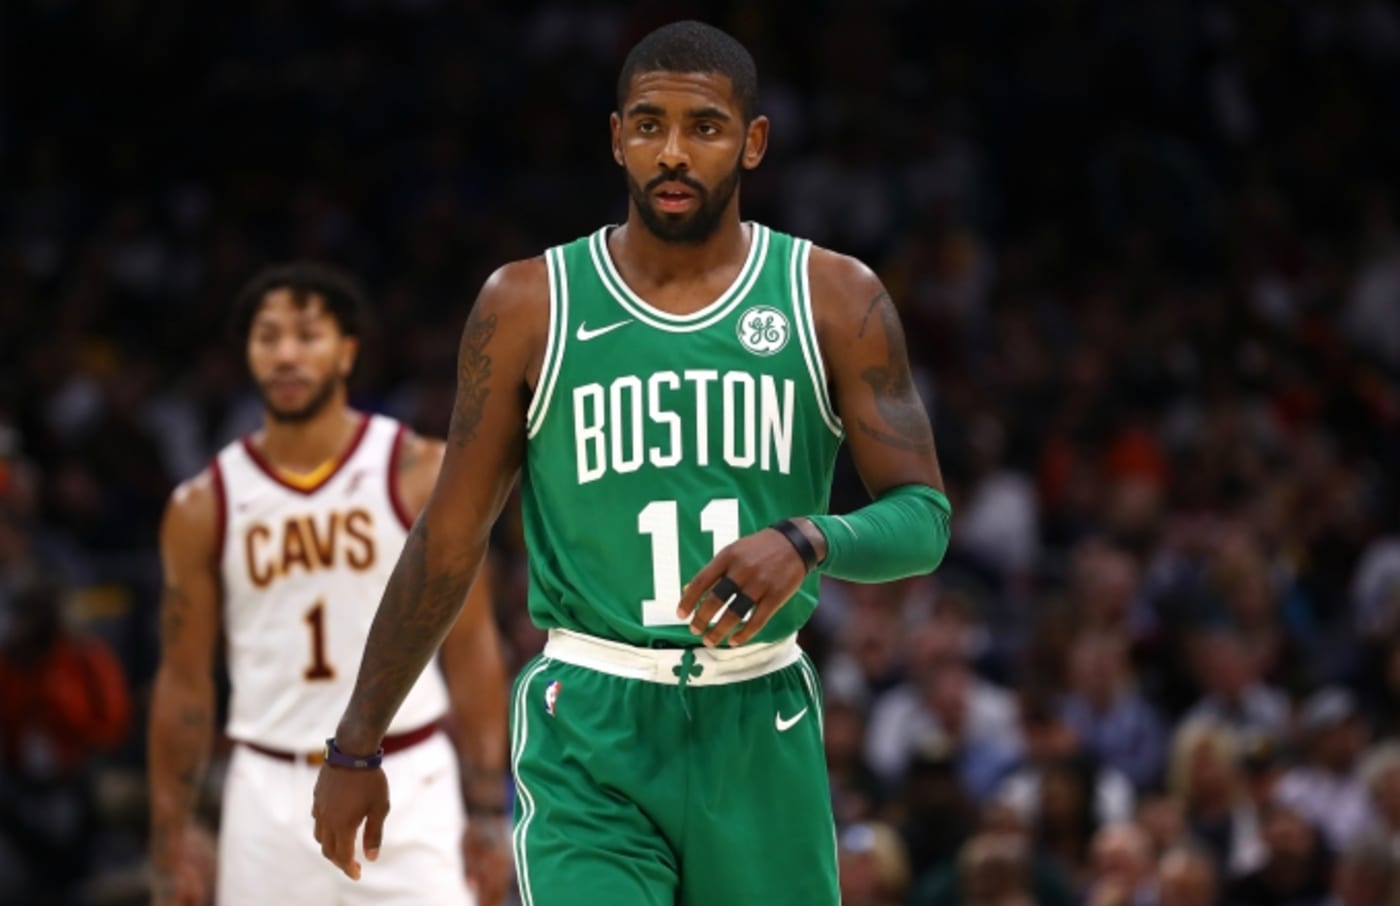 Kyrie Irving during his first regular season game with the Celtics.